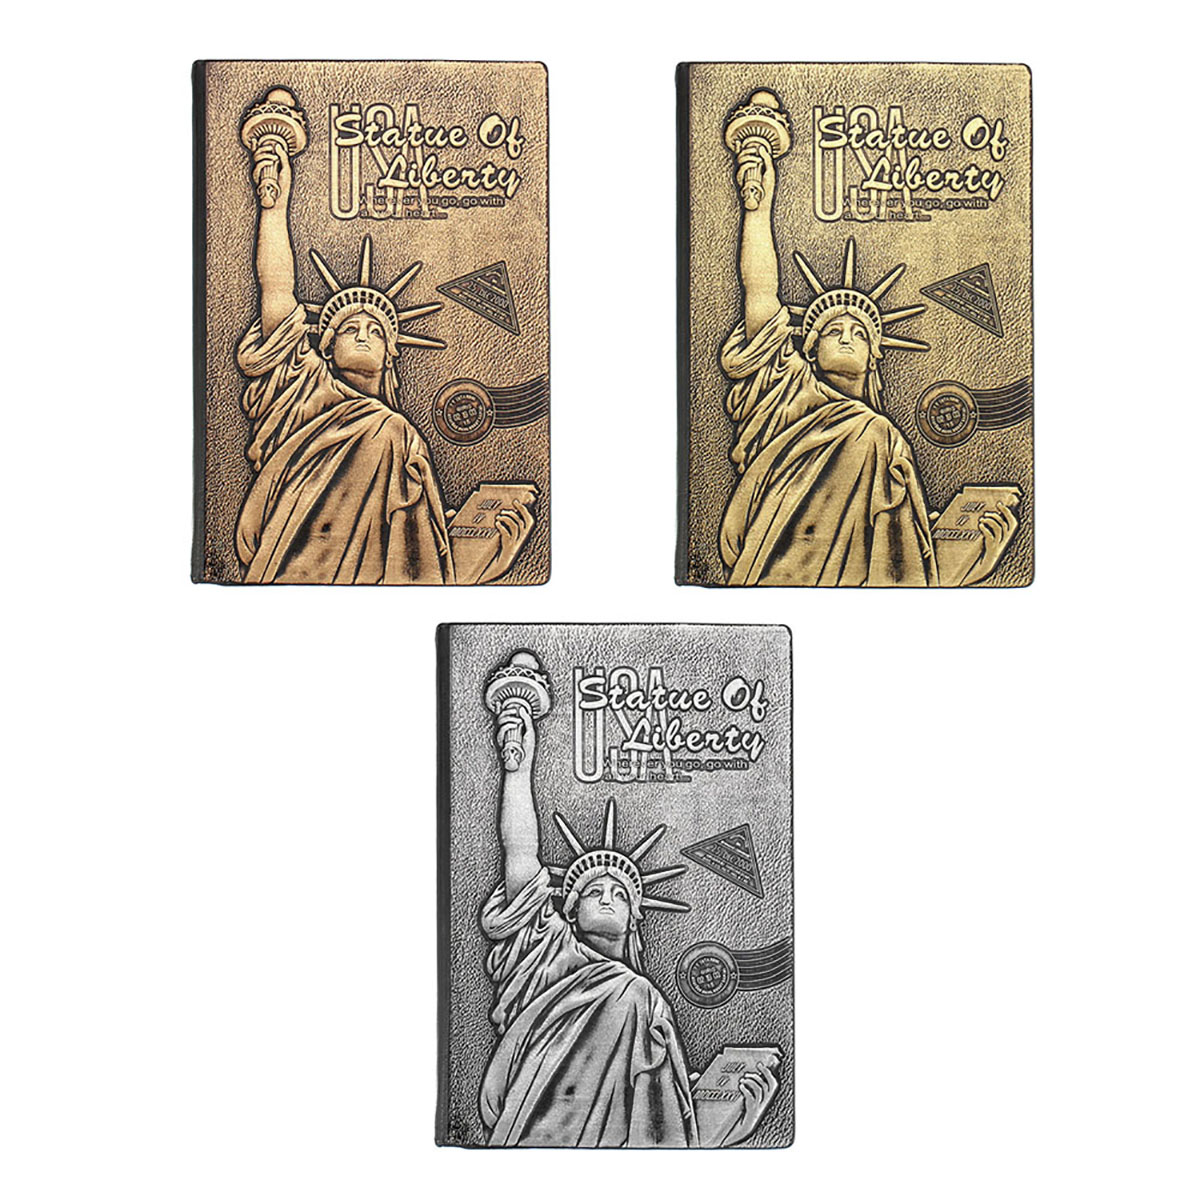 

Statue of Liberty Notebook Travel School Notebook Gift Fashion Notebook for School Office Supplies